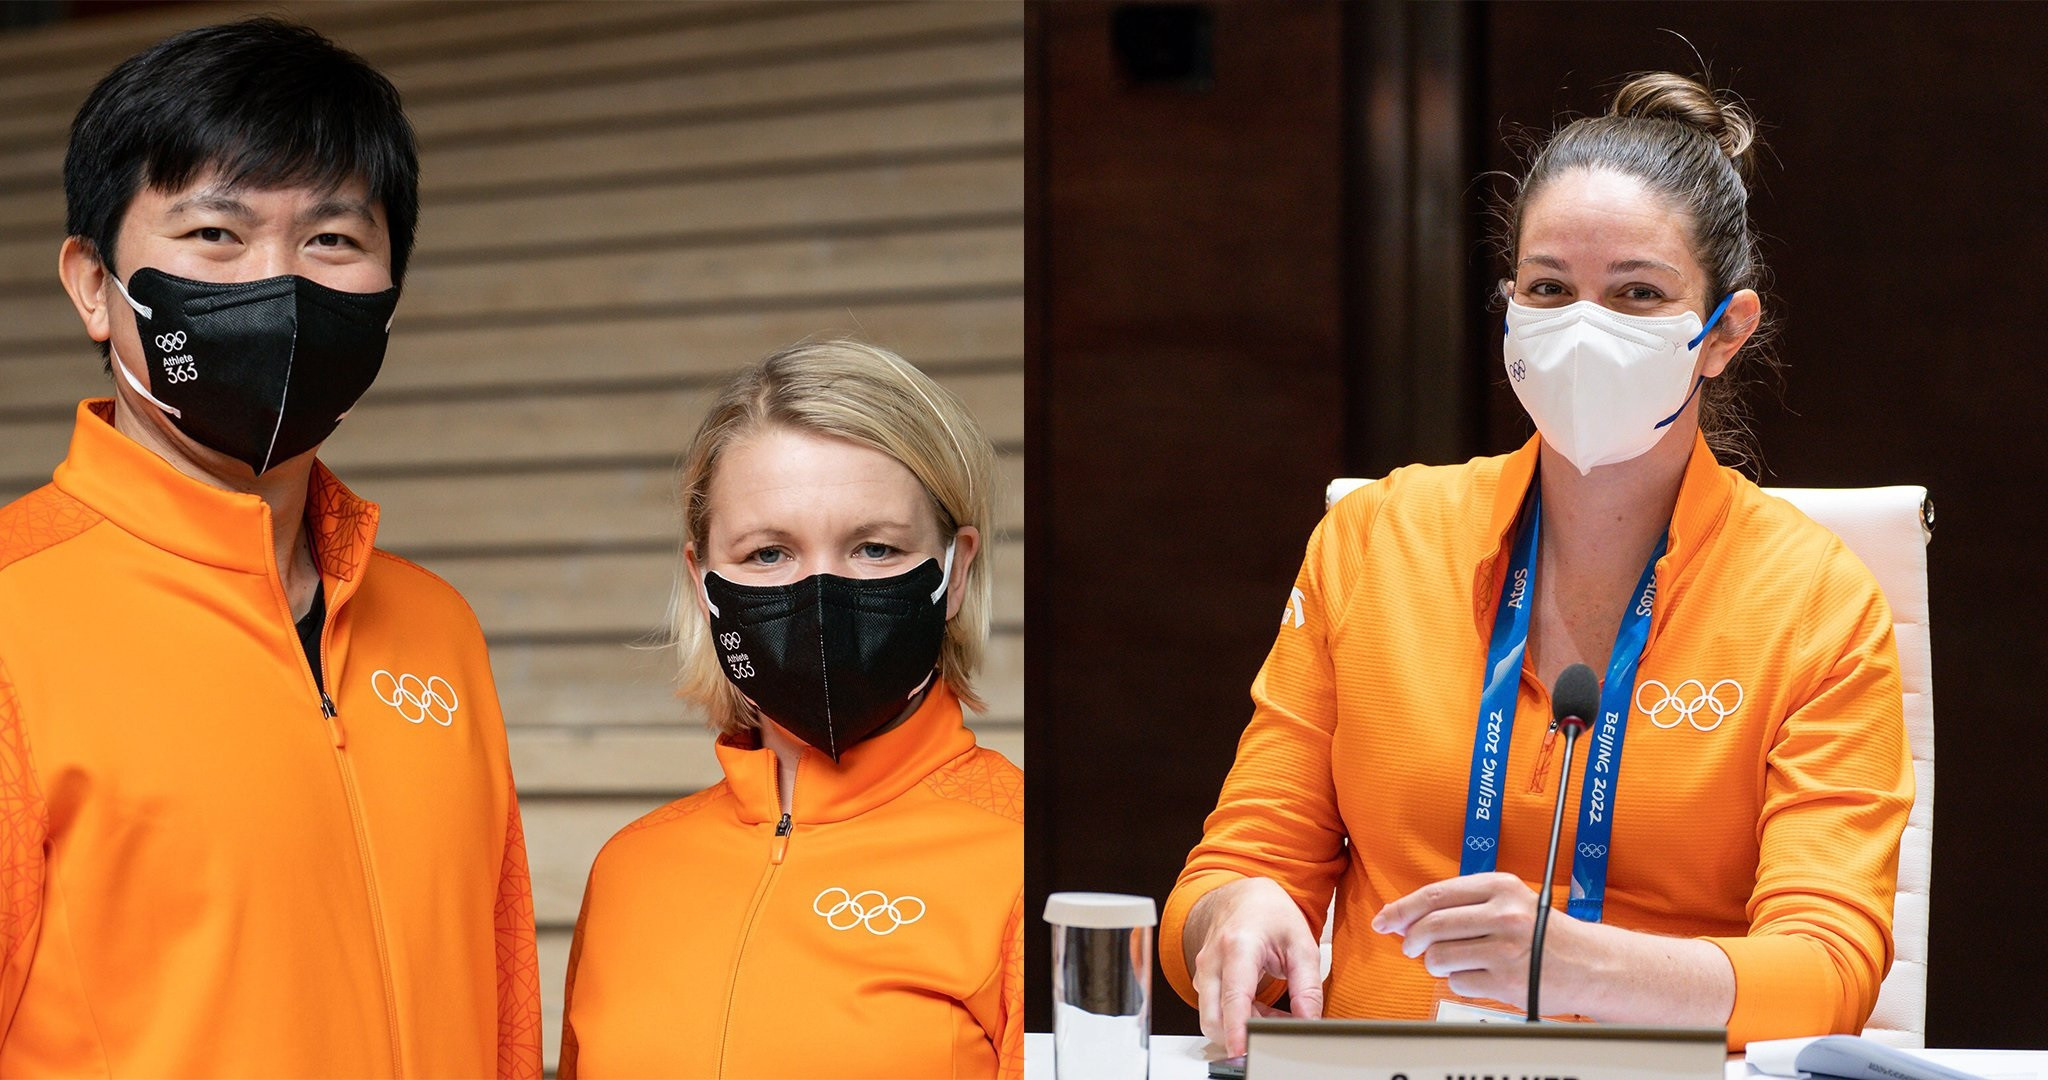 Emma Terho, centre, will continue to lead the IOC Athletes' Commission with Ryu Seung-min, left, and Sarah Walker acting as vice chairs ©IOC